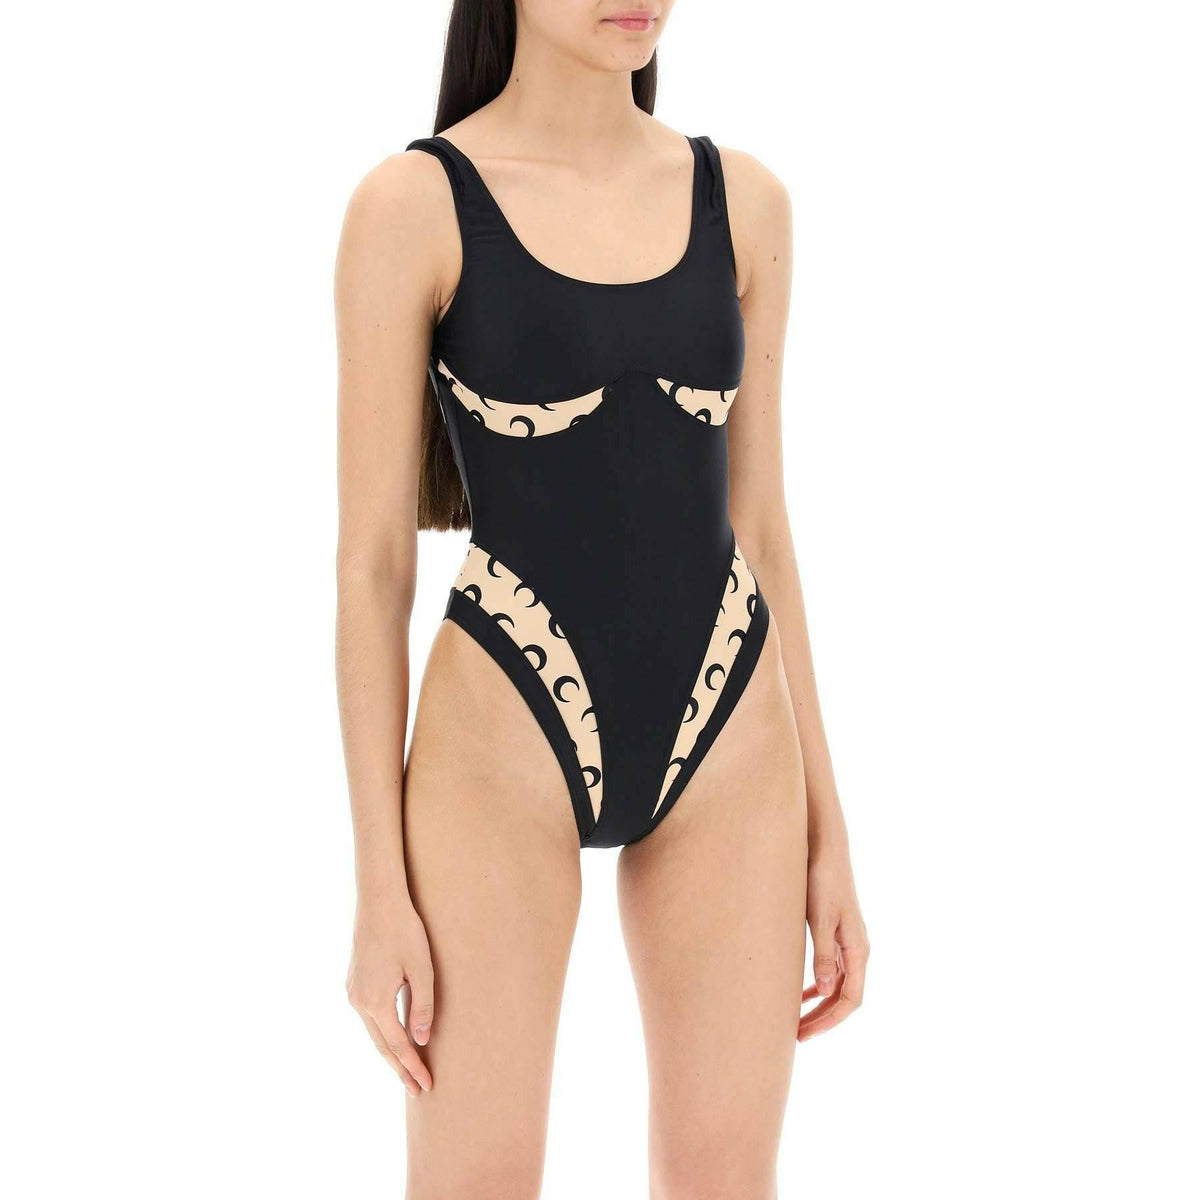 MARINE SERRE - Black All Over Moon Recycled Lycra One Piece Swimsuit - JOHN JULIA